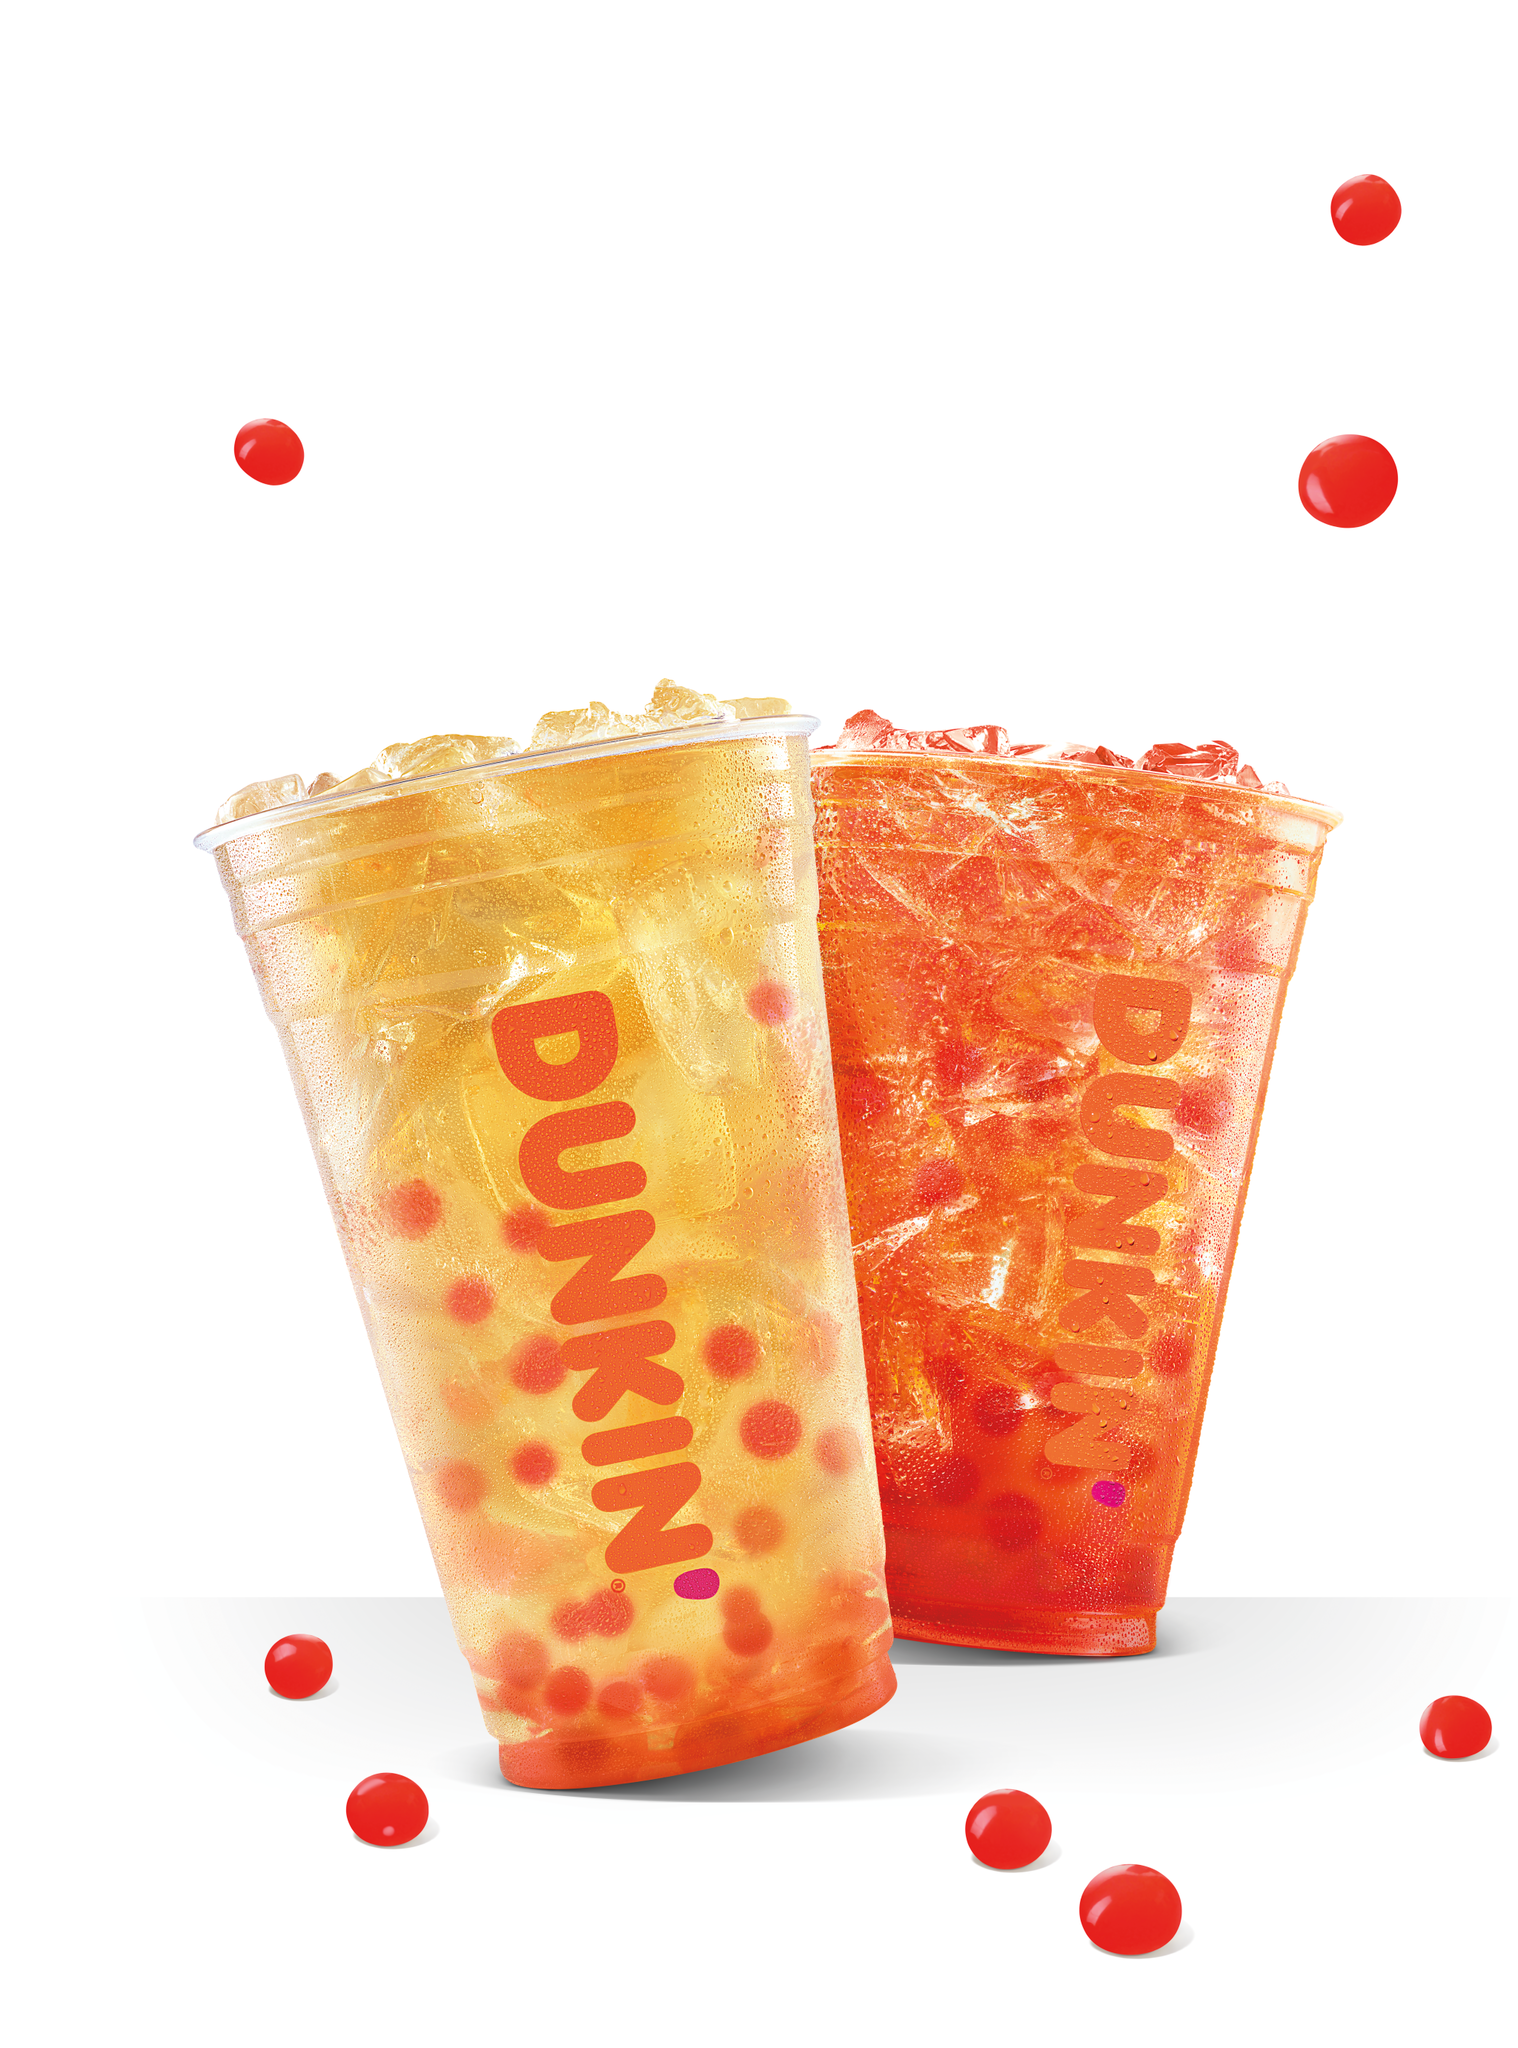 Dunkin' tests bubble tea, coffee, summer shandies and more new drinks at  Massachusetts locations this summer 